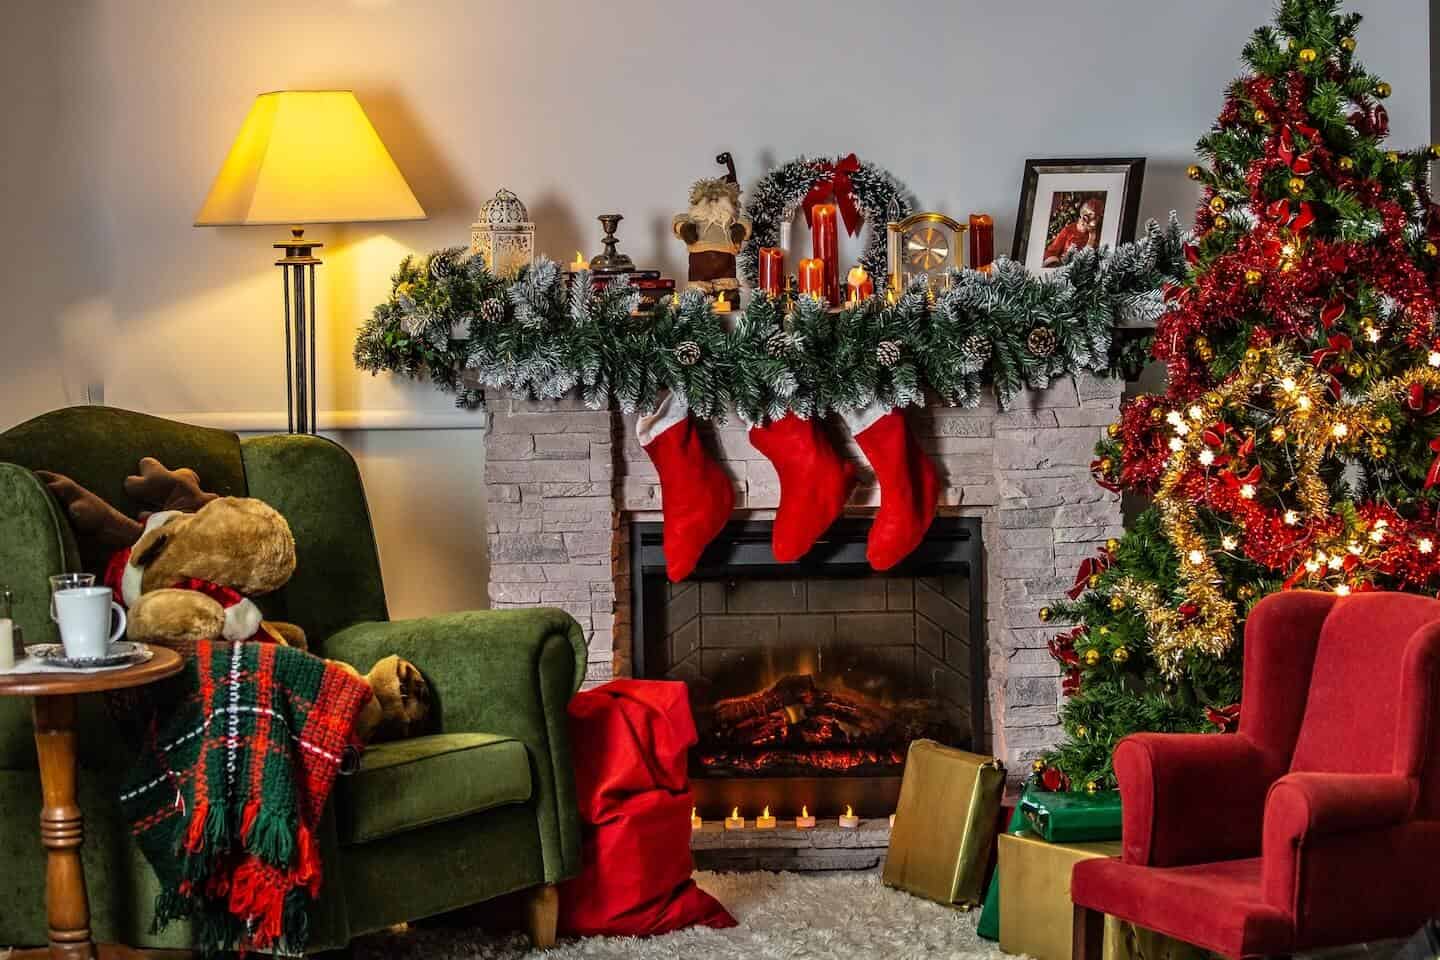 A living room decorated for Christmas, with red stockings hanging over a white fireplace next to a green armchair.